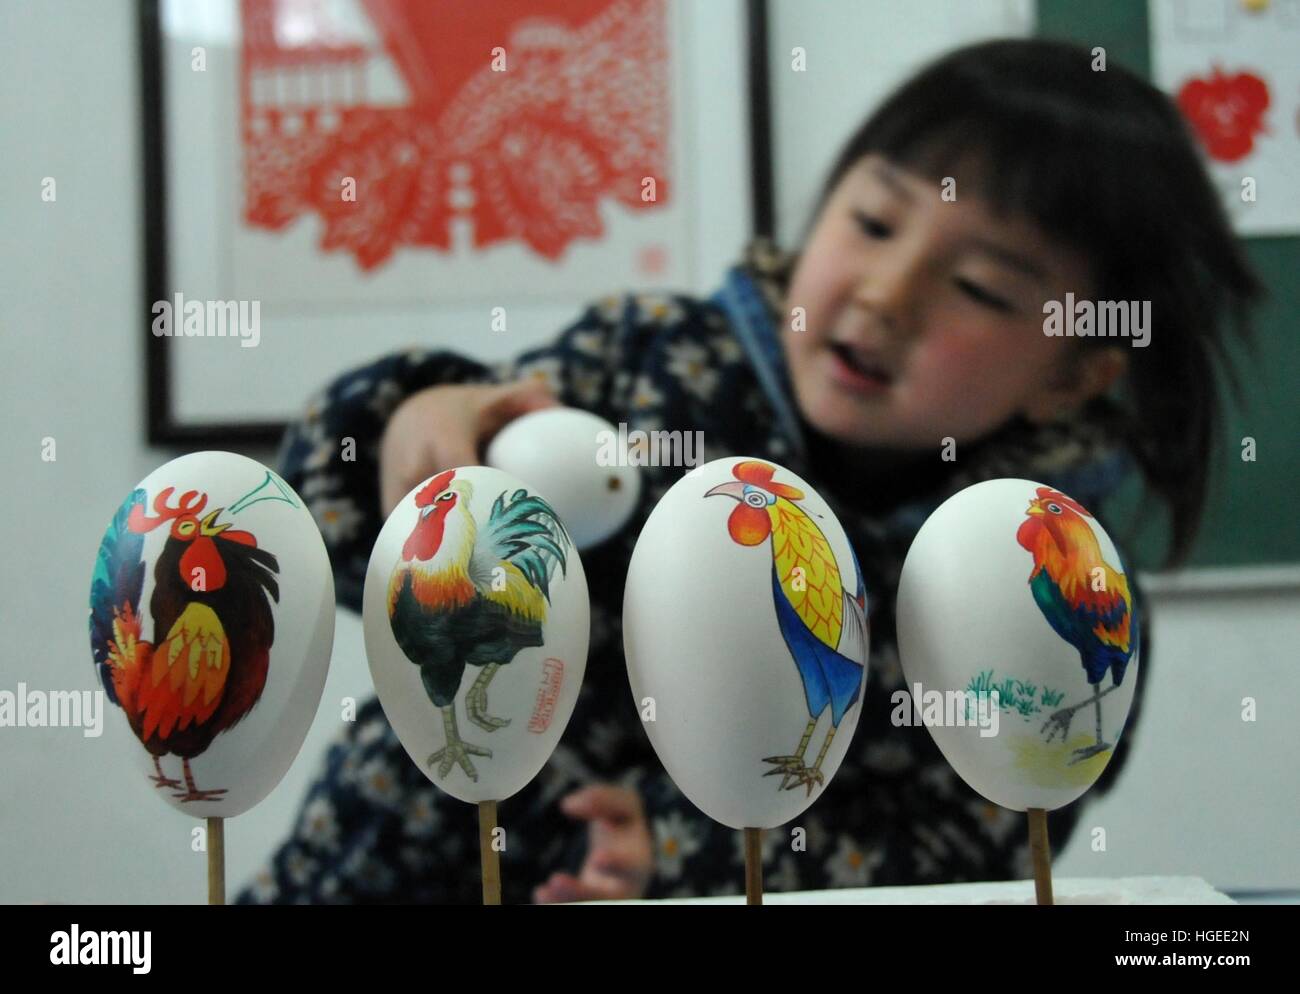 Anyan, Anyan, China. 7th Jan, 2017. Anyang, CHINA-January 7 2017: (EDITORIAL USE ONLY. CHINA OUT) The painted egg shells.Fan Xiaolei, a primary school teacher, paints pattern of rooster on egg shell in Neihuang County, Anyang City, central China's Henan Province, January 7th, 2017, marking the upcoming Spring Festival of the Year of Rooster. © SIPA Asia/ZUMA Wire/Alamy Live News Stock Photo